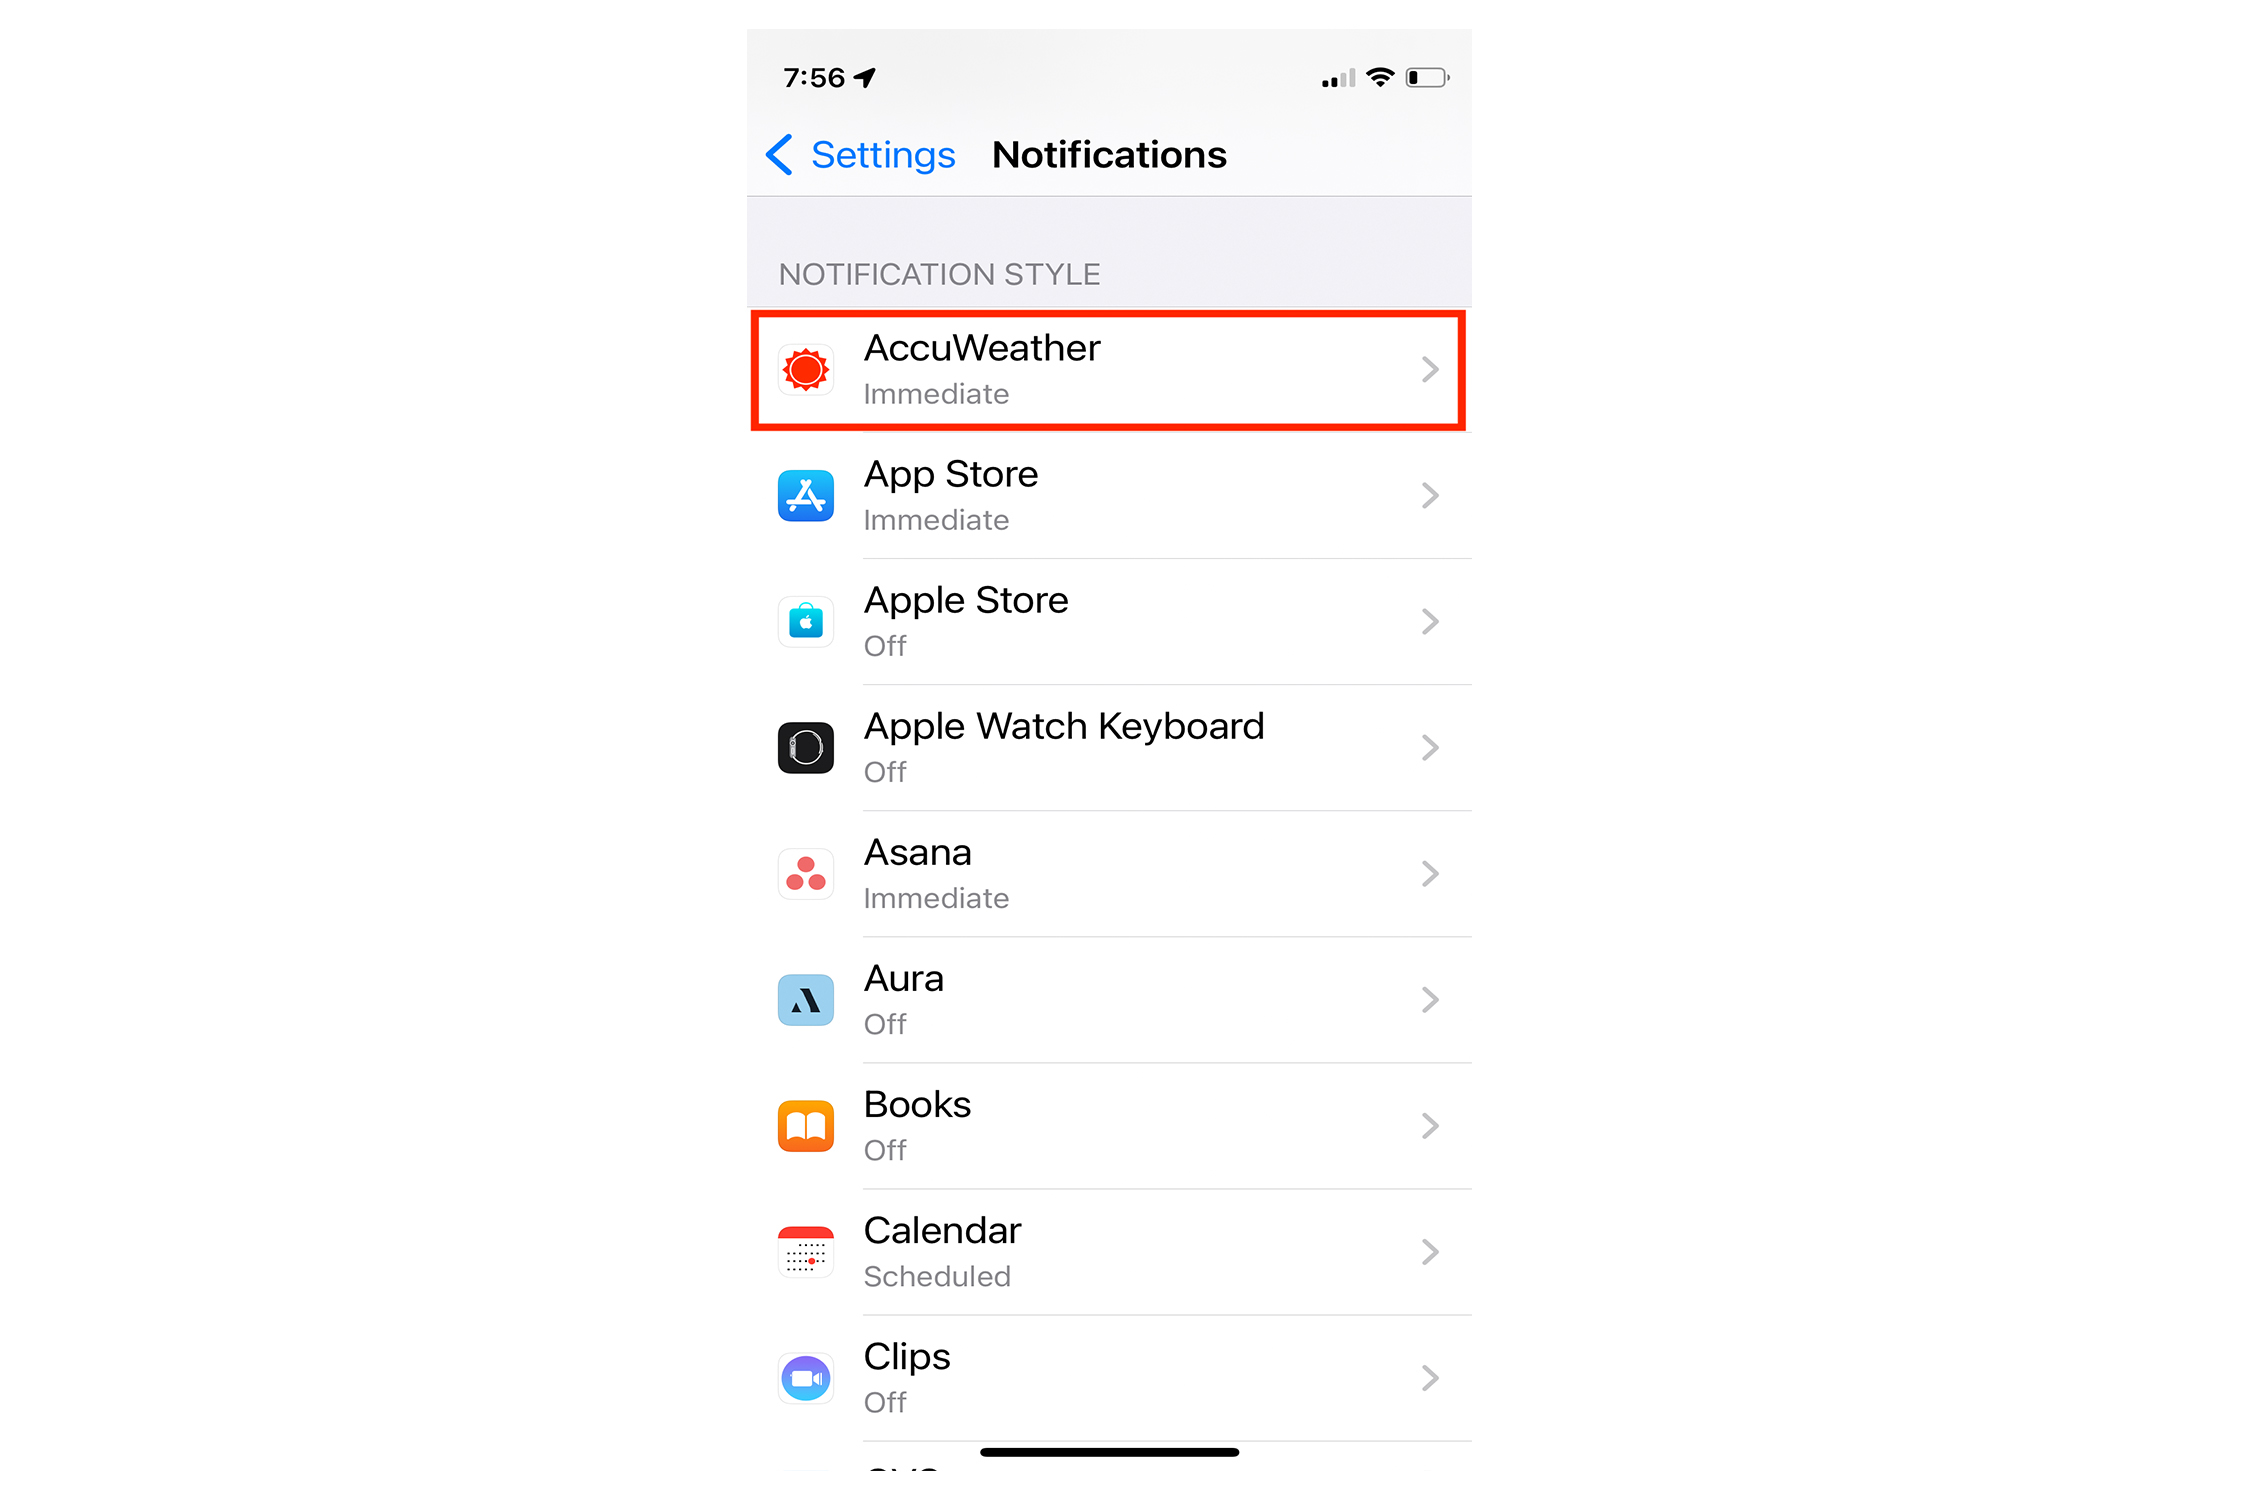 iPhone notification settings for Accuweather app.